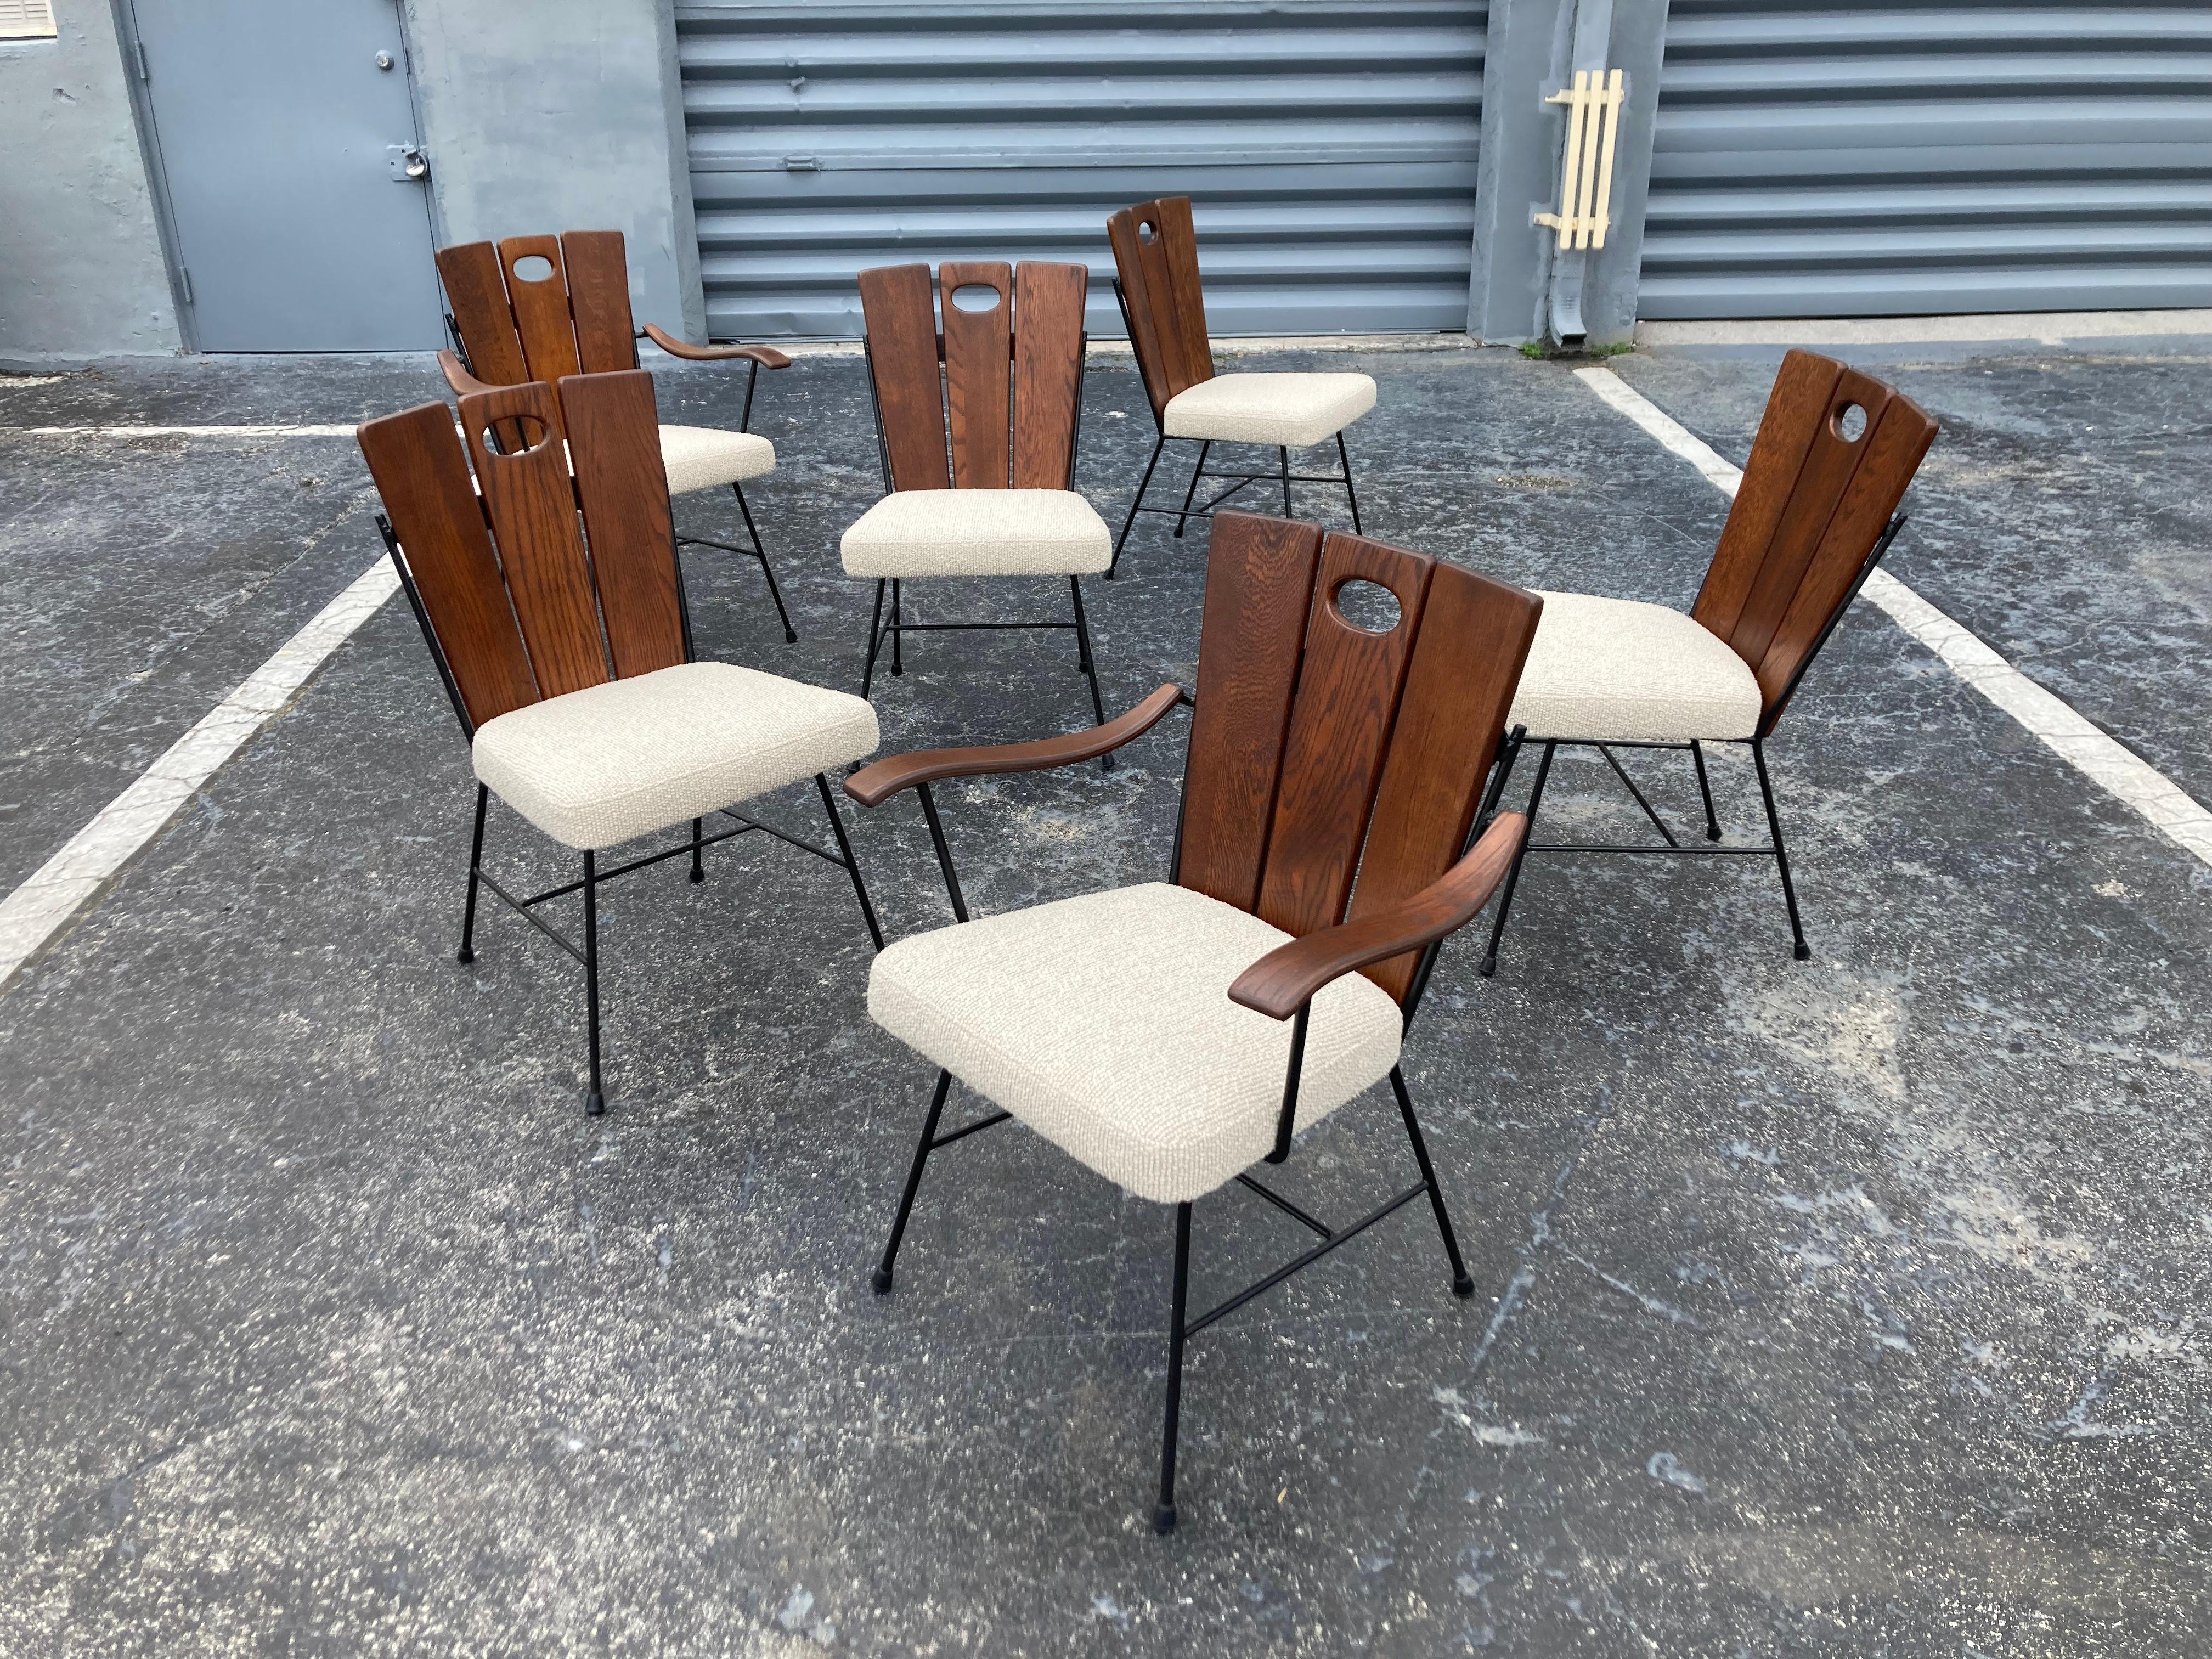 Set of Six 1950s Iron and Oak Dining Chairs. Four Side and Two Arm chairs. 
Black painted iron frames with solid oak backs. Seats have been recovered.
Arm chairs are 25.25 wide and the arm height is 24”.
Sturdy chairs and ready for a new home.